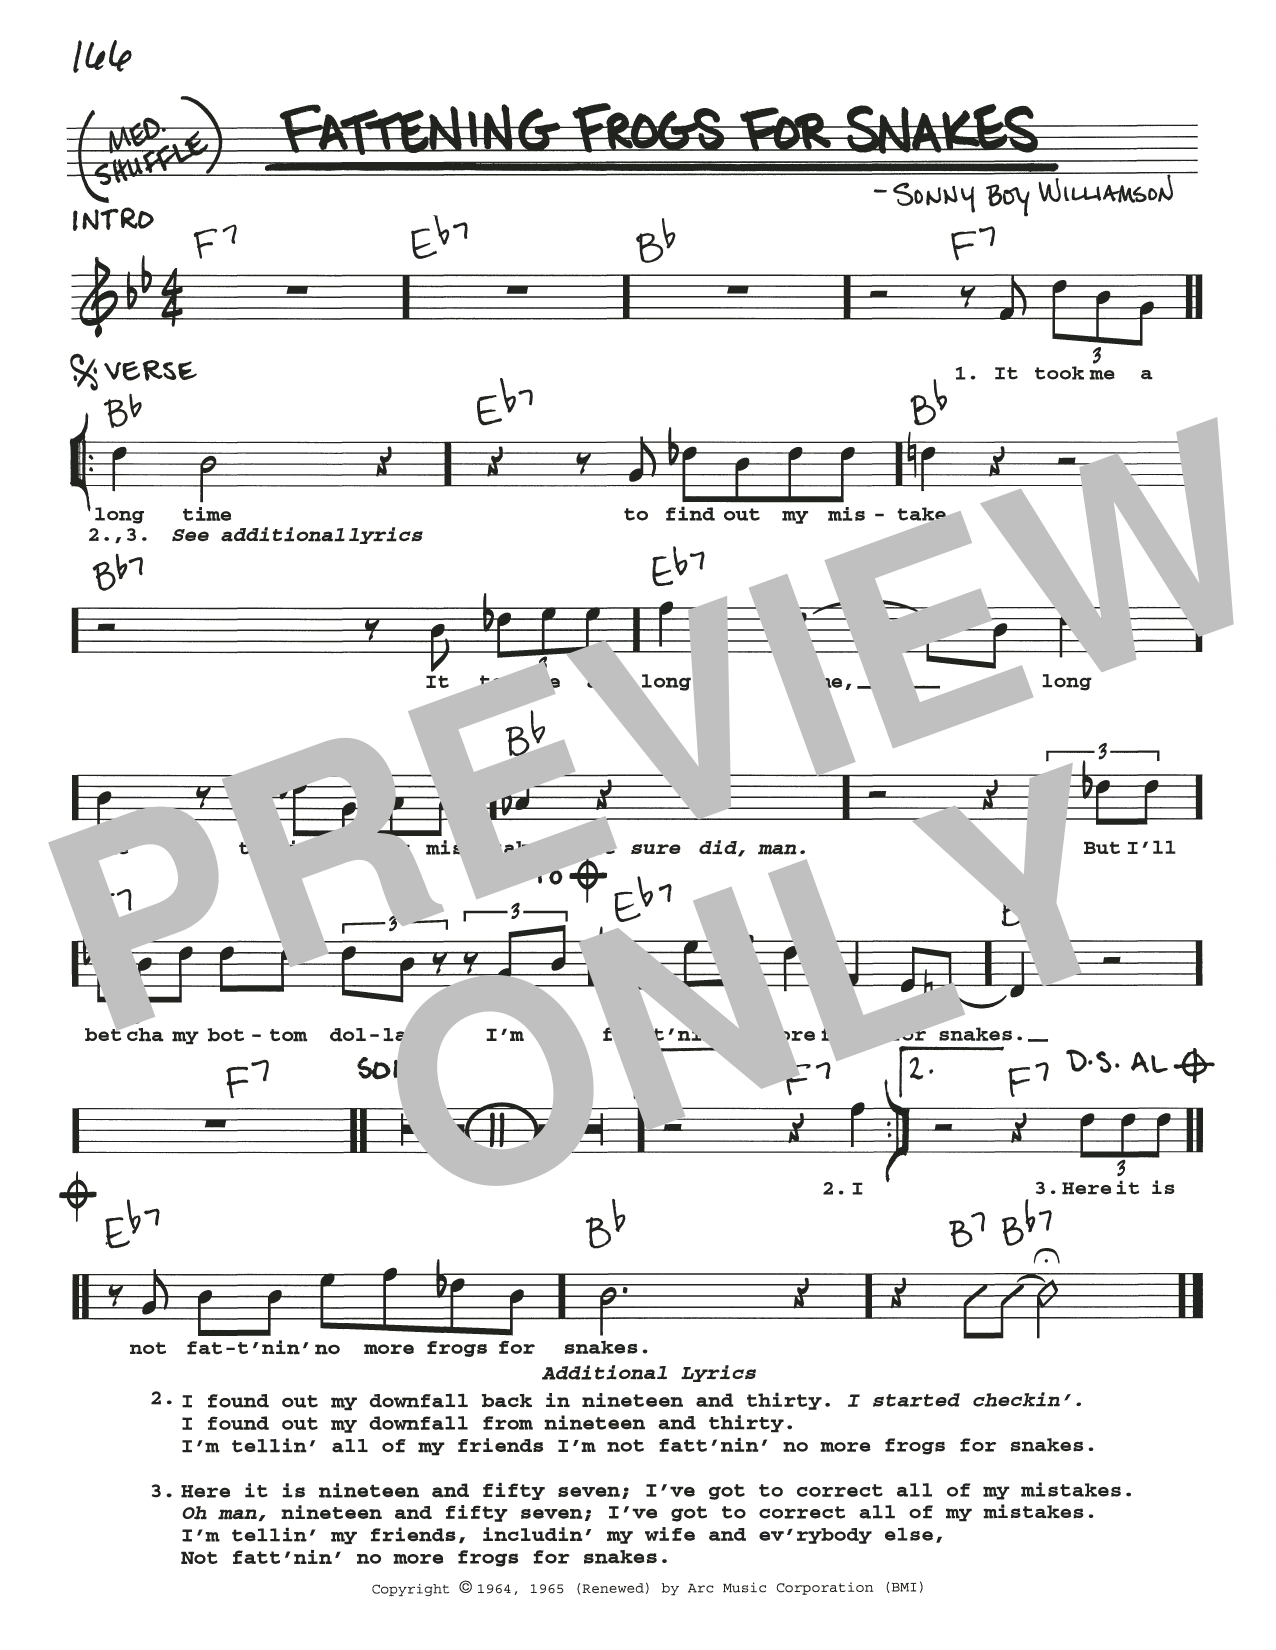 Download Sonny Boy Williamson Fattening Frogs For Snakes Sheet Music